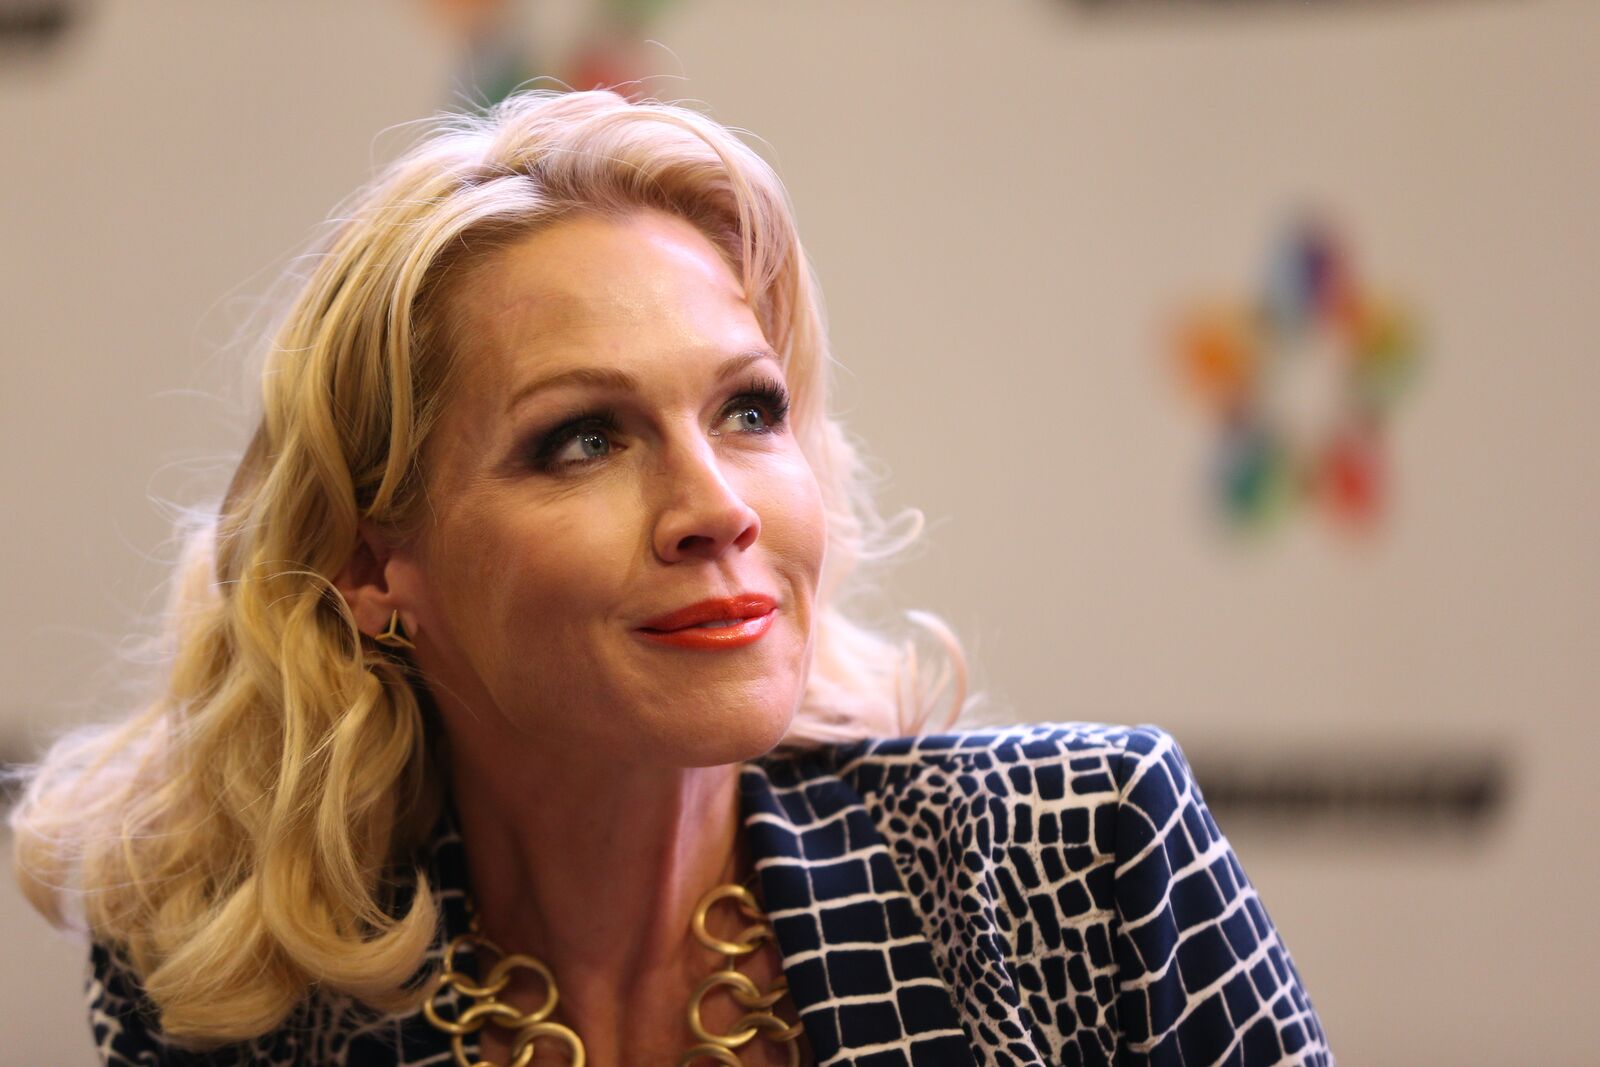 ctress Jennie Garth signs copies of her book "Deep Thoughts from a Hollywood Blonde" at Mall of America on March 7, 2014 in Bloomington, Minnesota | Photo: Getty Images